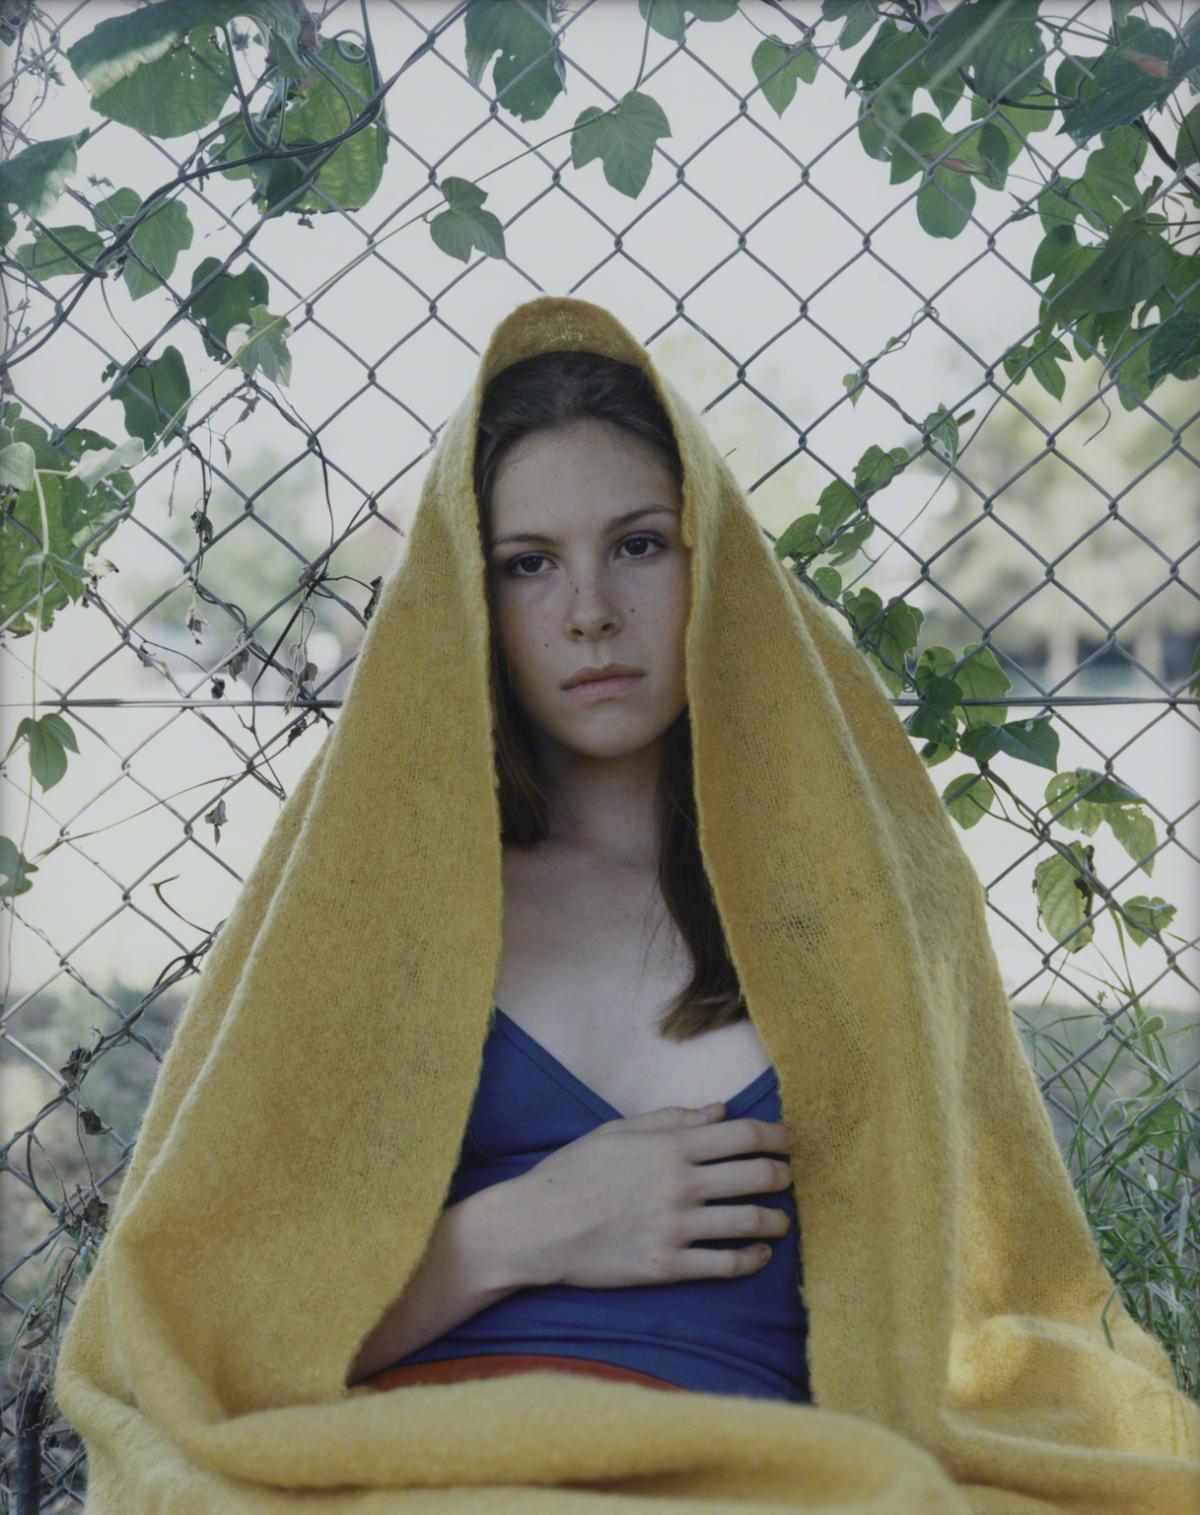 Color photograph of a young woman with a yellow blanket draped over her head sitting by a chain link fence